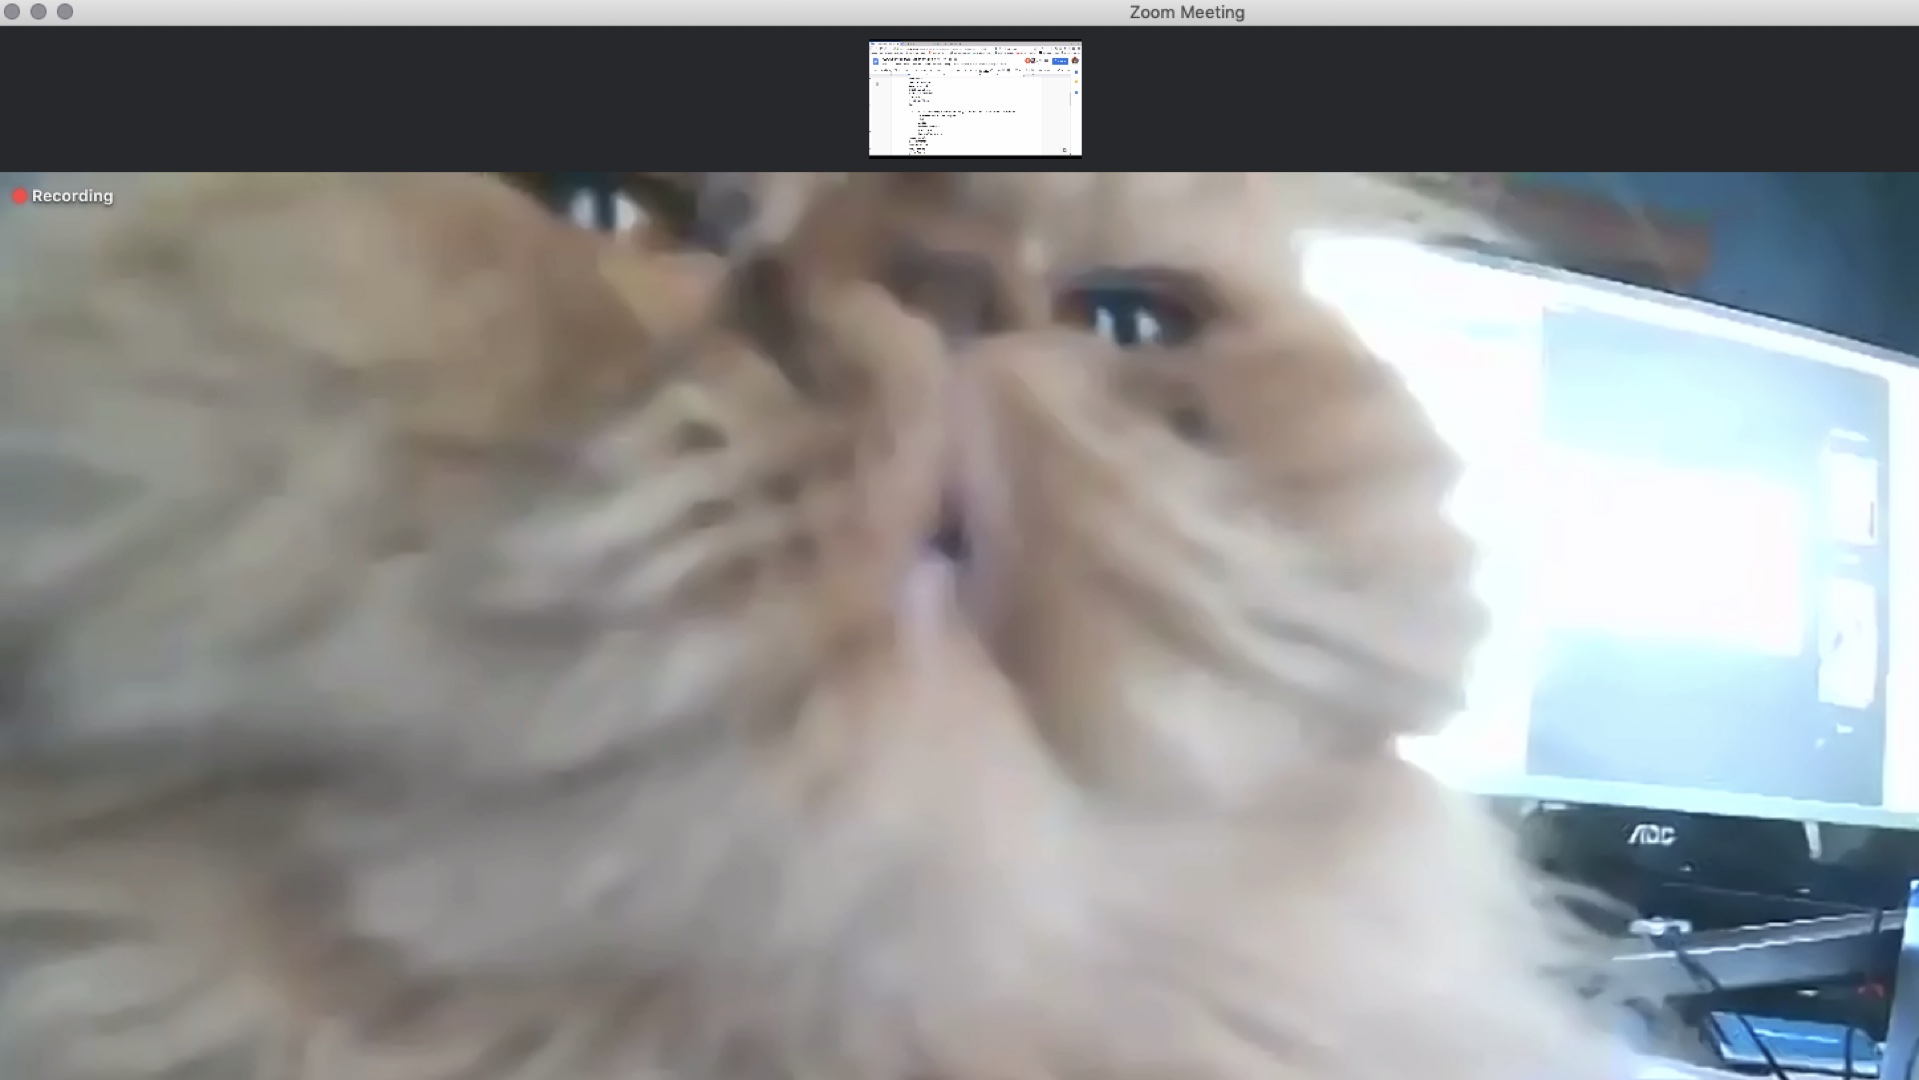 Image of a very fluffy cat very close to a camera in a zoom chat.